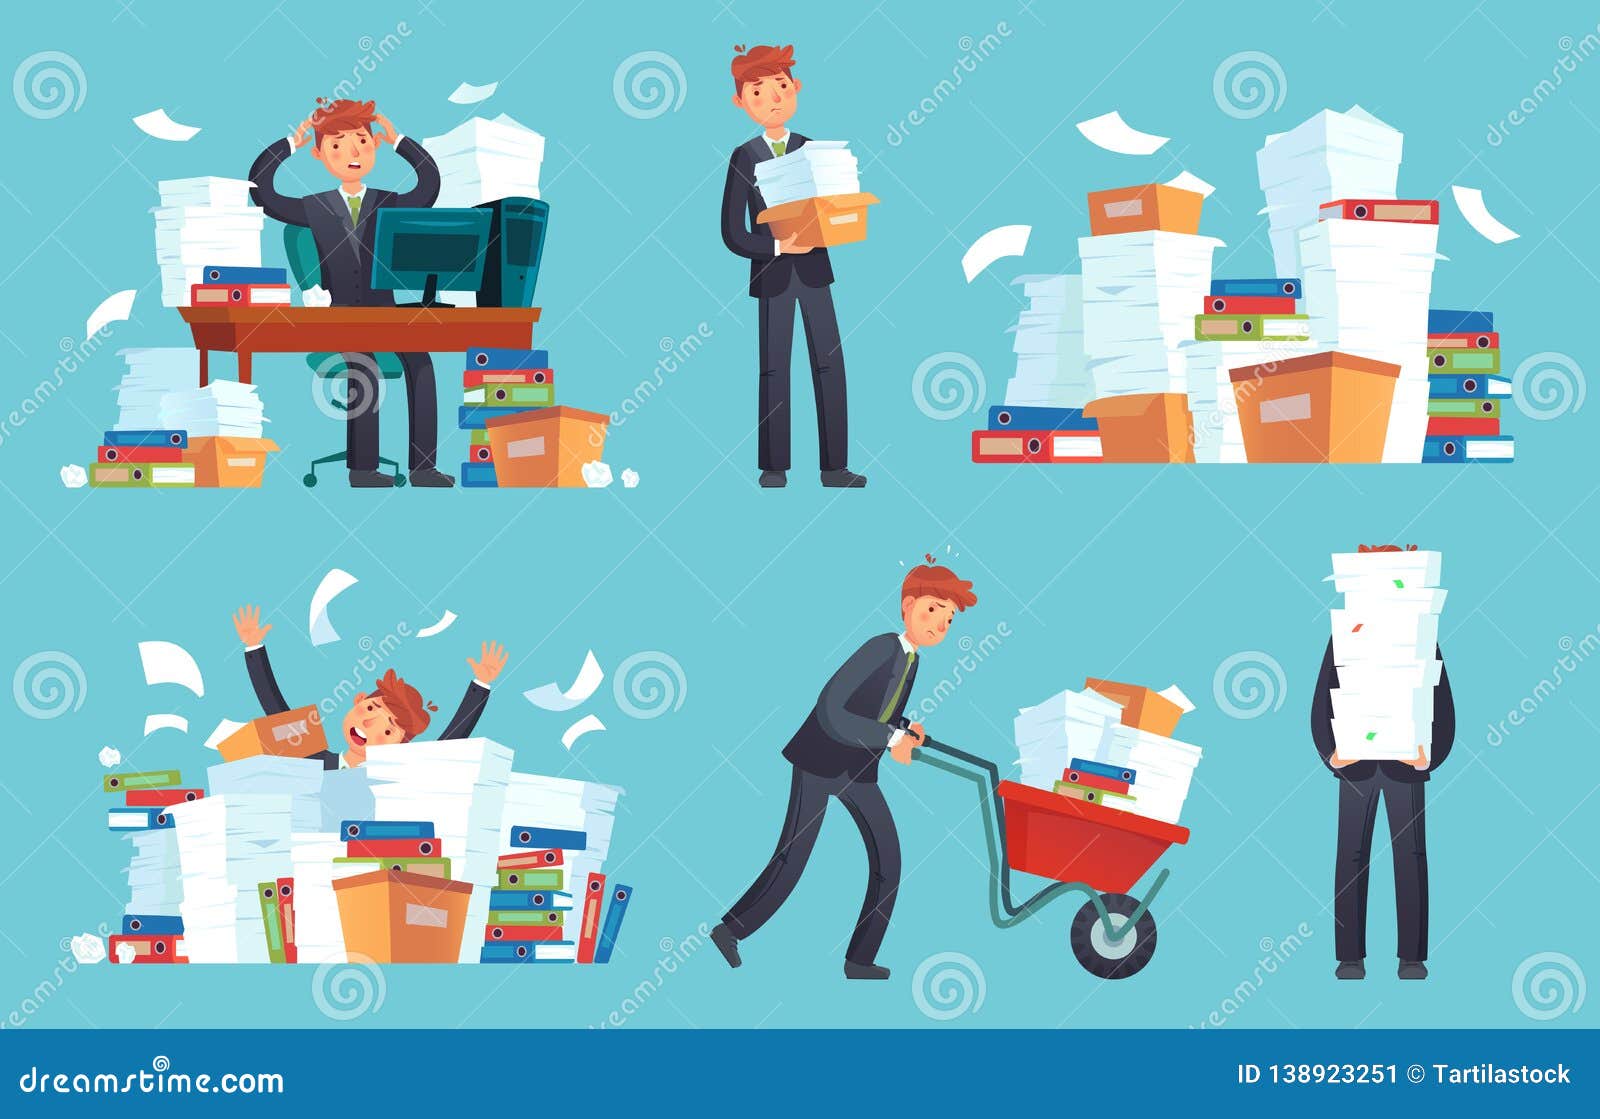 Unorganized Office Papers Businessman Overwhelmed Work Messy Paper